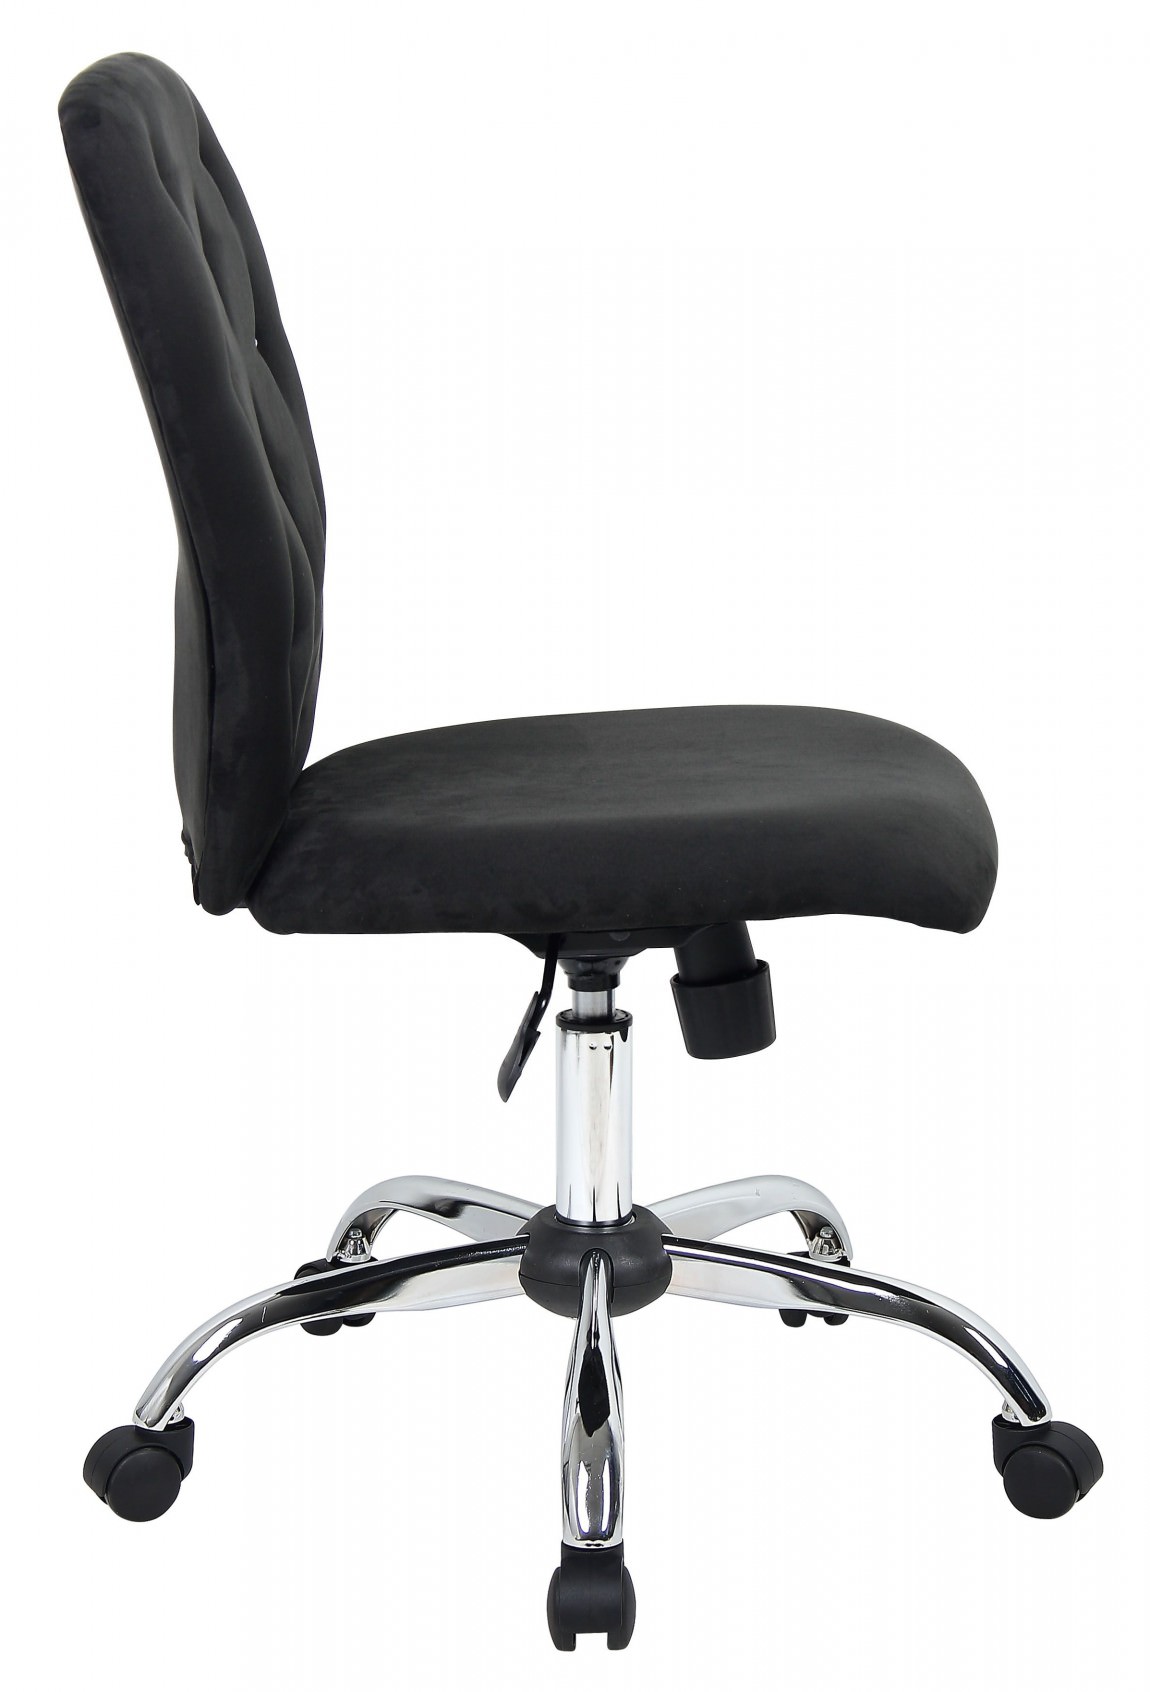 Tufted Office Chair without Arms